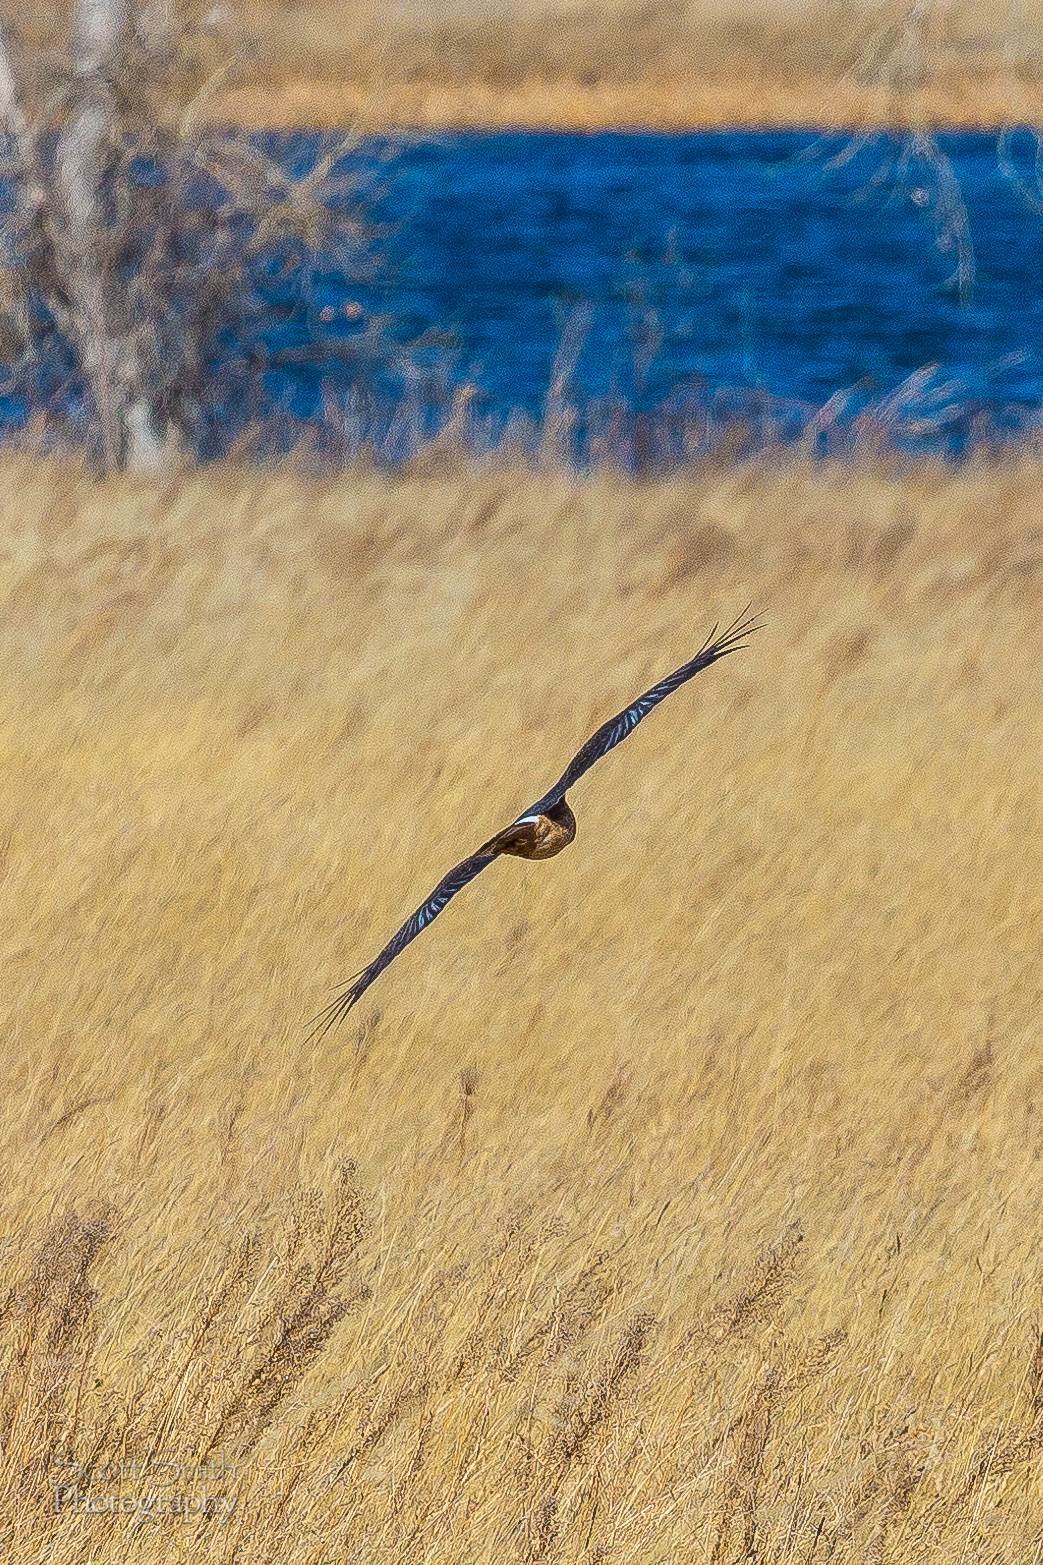 Marsh Hawk 3  A marsh hawk glides over the grass at the Rocky Mountain Arsenal Wildlife Refuge. by Scott Smith Photos